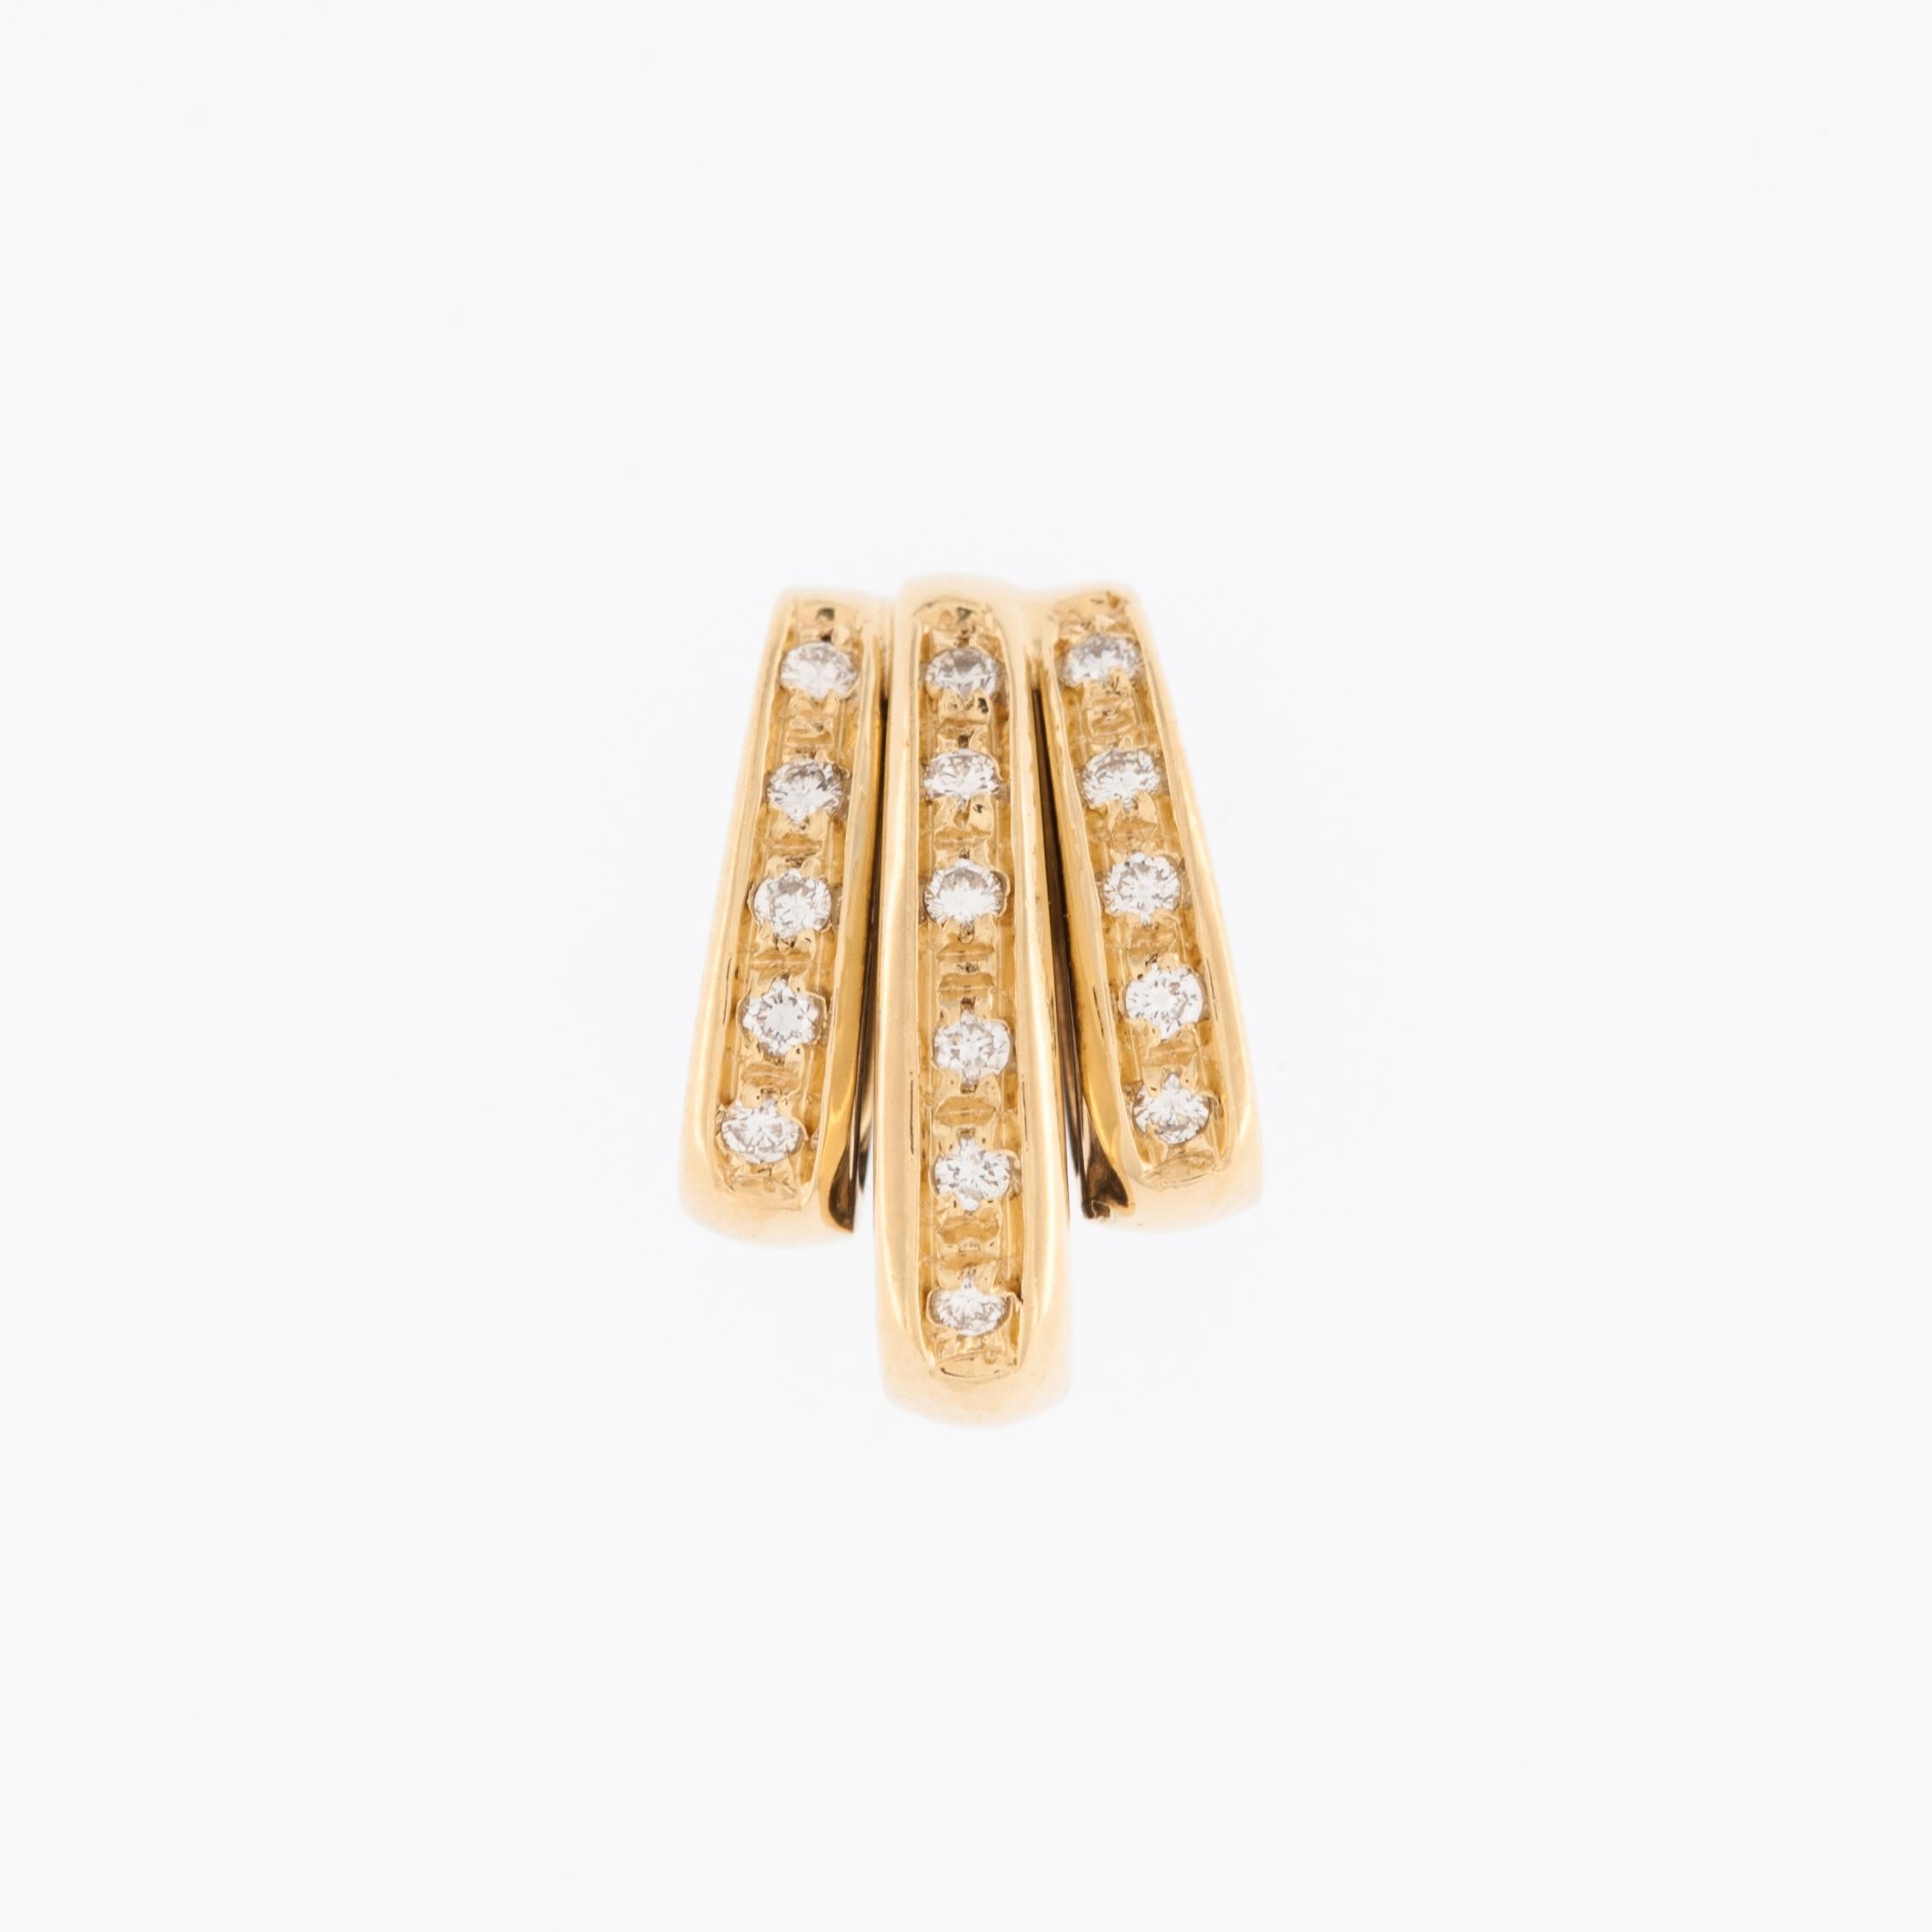 This Italian 18 karat yellow gold pendant is a true embodiment of craftsmanship and elegance. Meticulously crafted in the renowned Italian tradition of jewelry making, it reflects the country's rich heritage of artistry and design.

The pendant